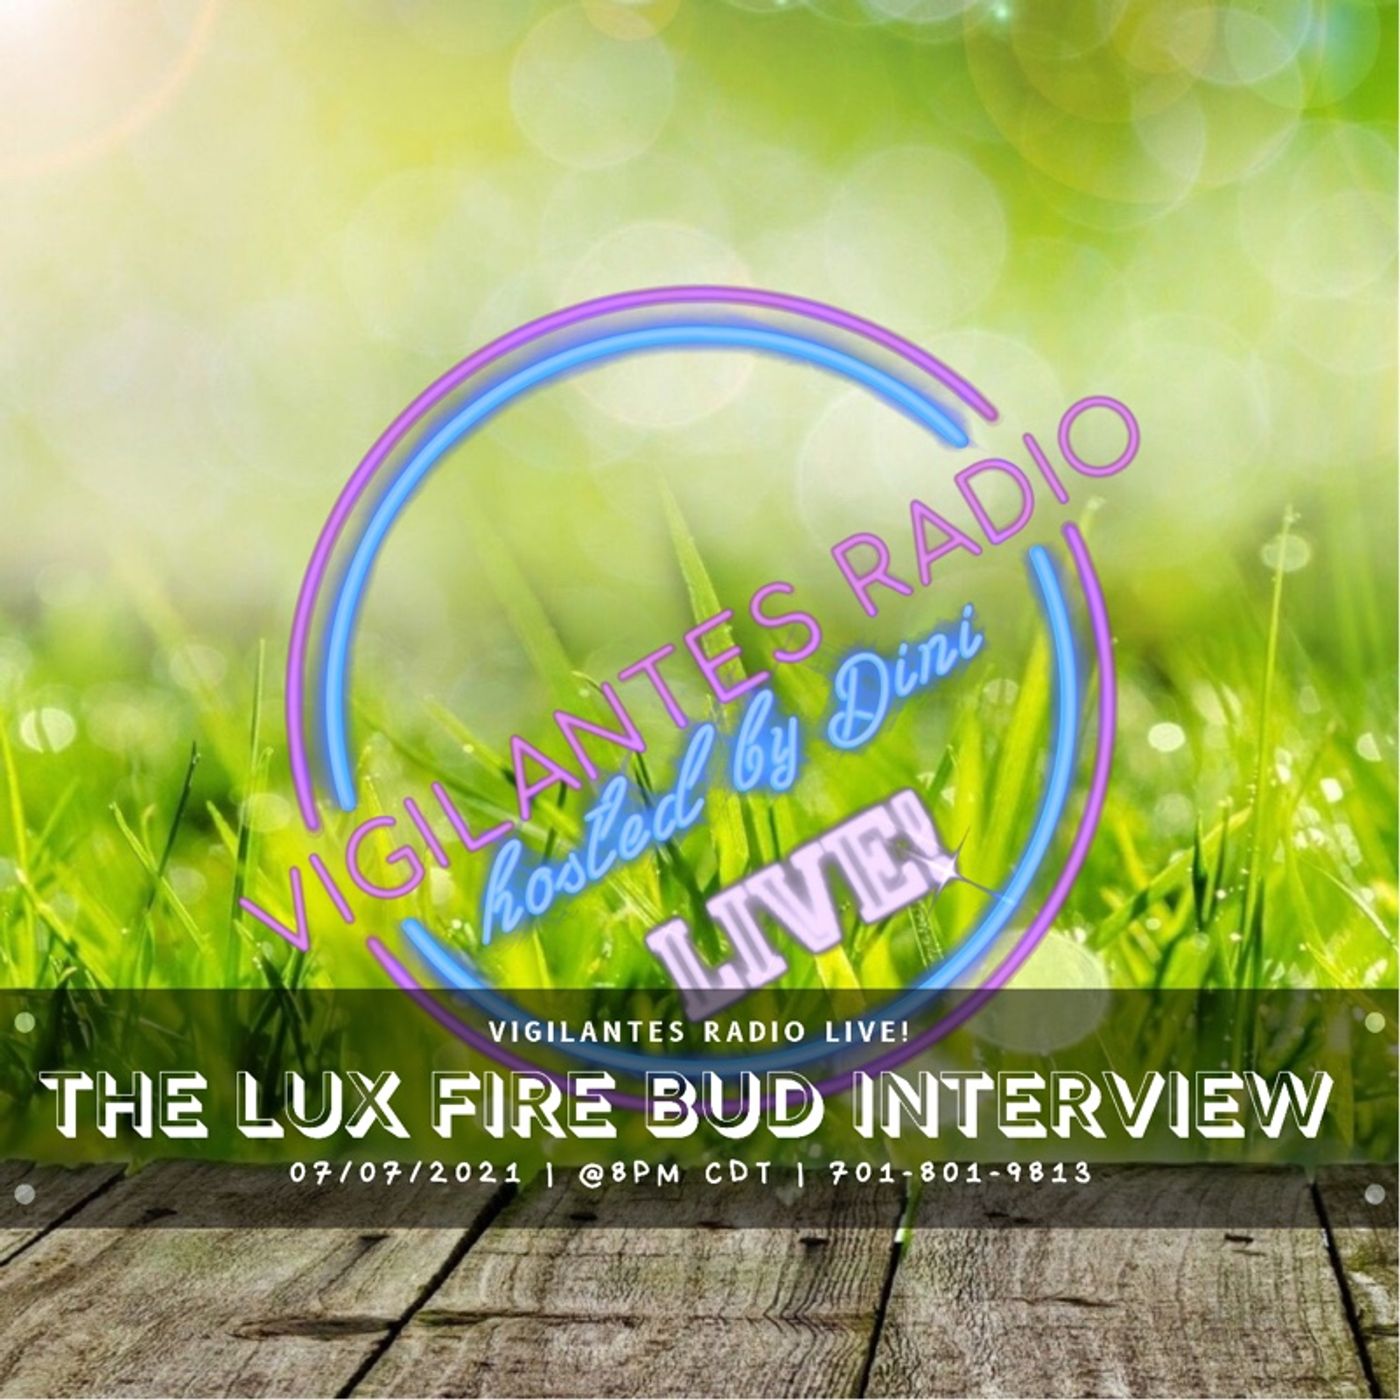 The Lux Fire Bud Interview. Image